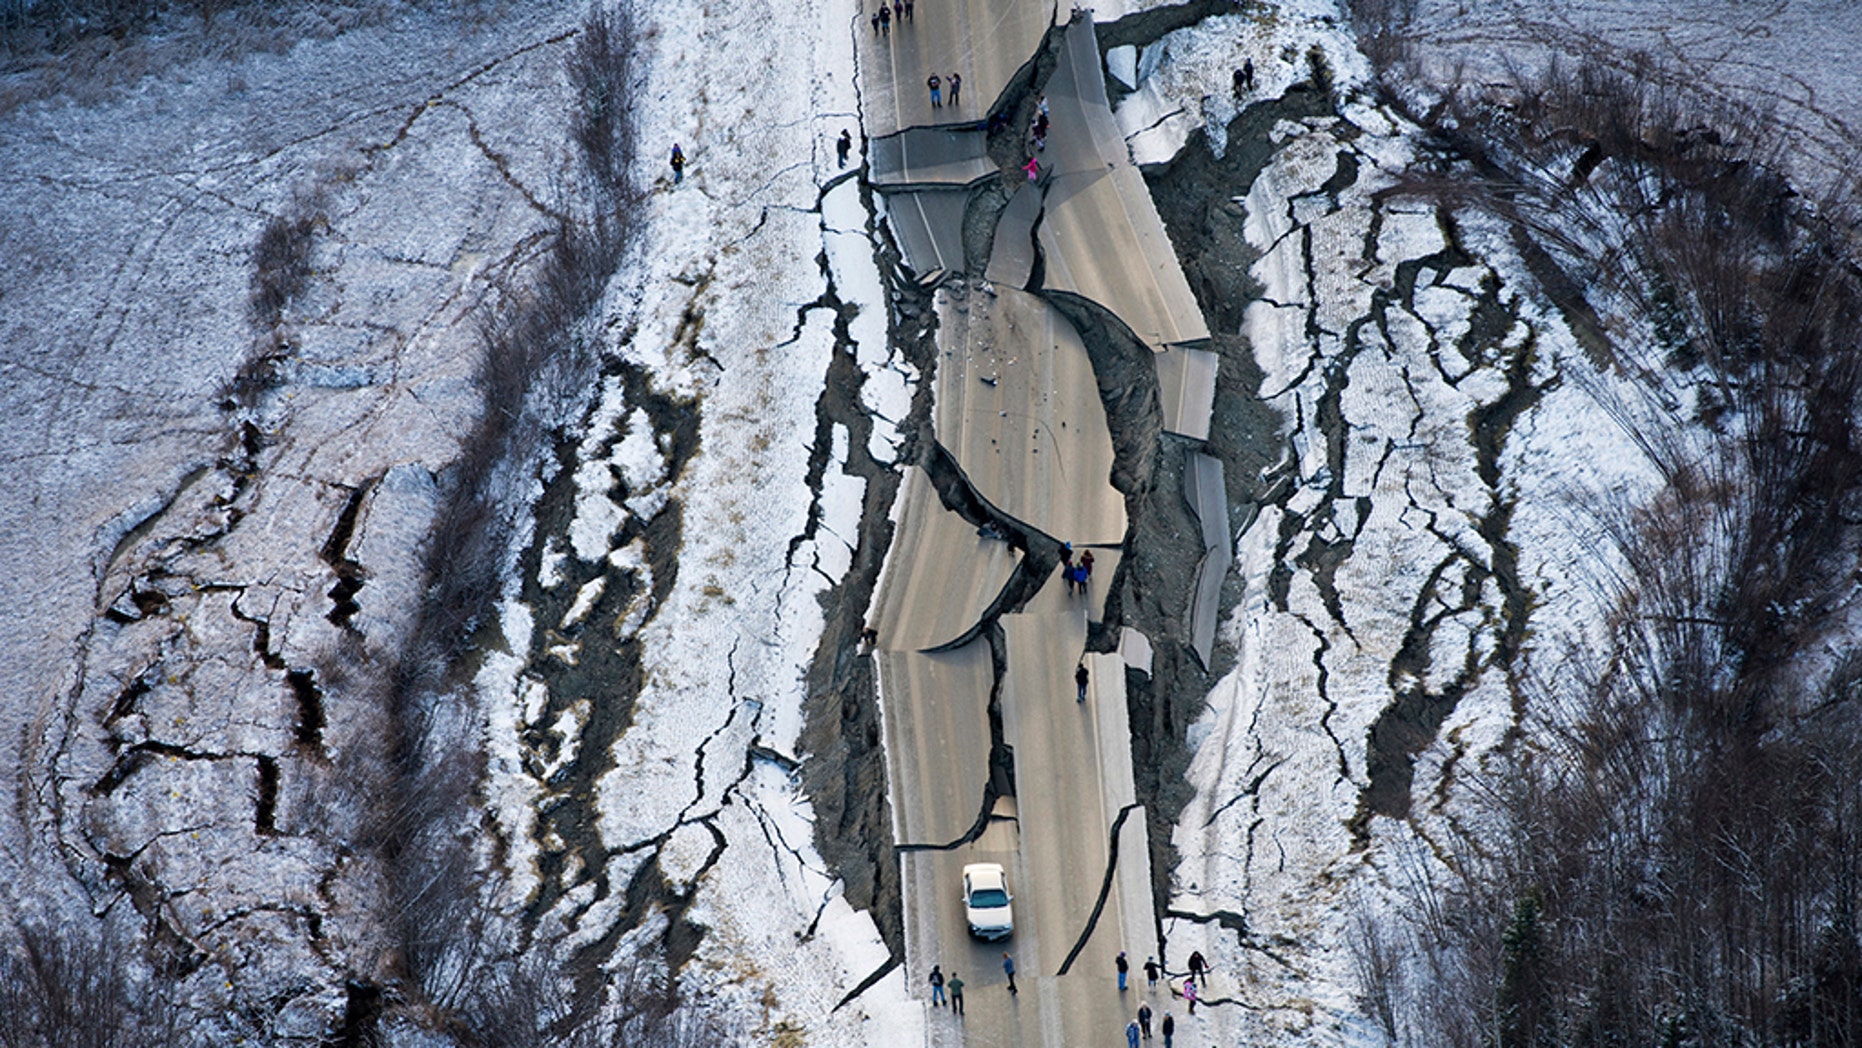 Alaska hit by dozens of small earthquakes in wake of Friday's major